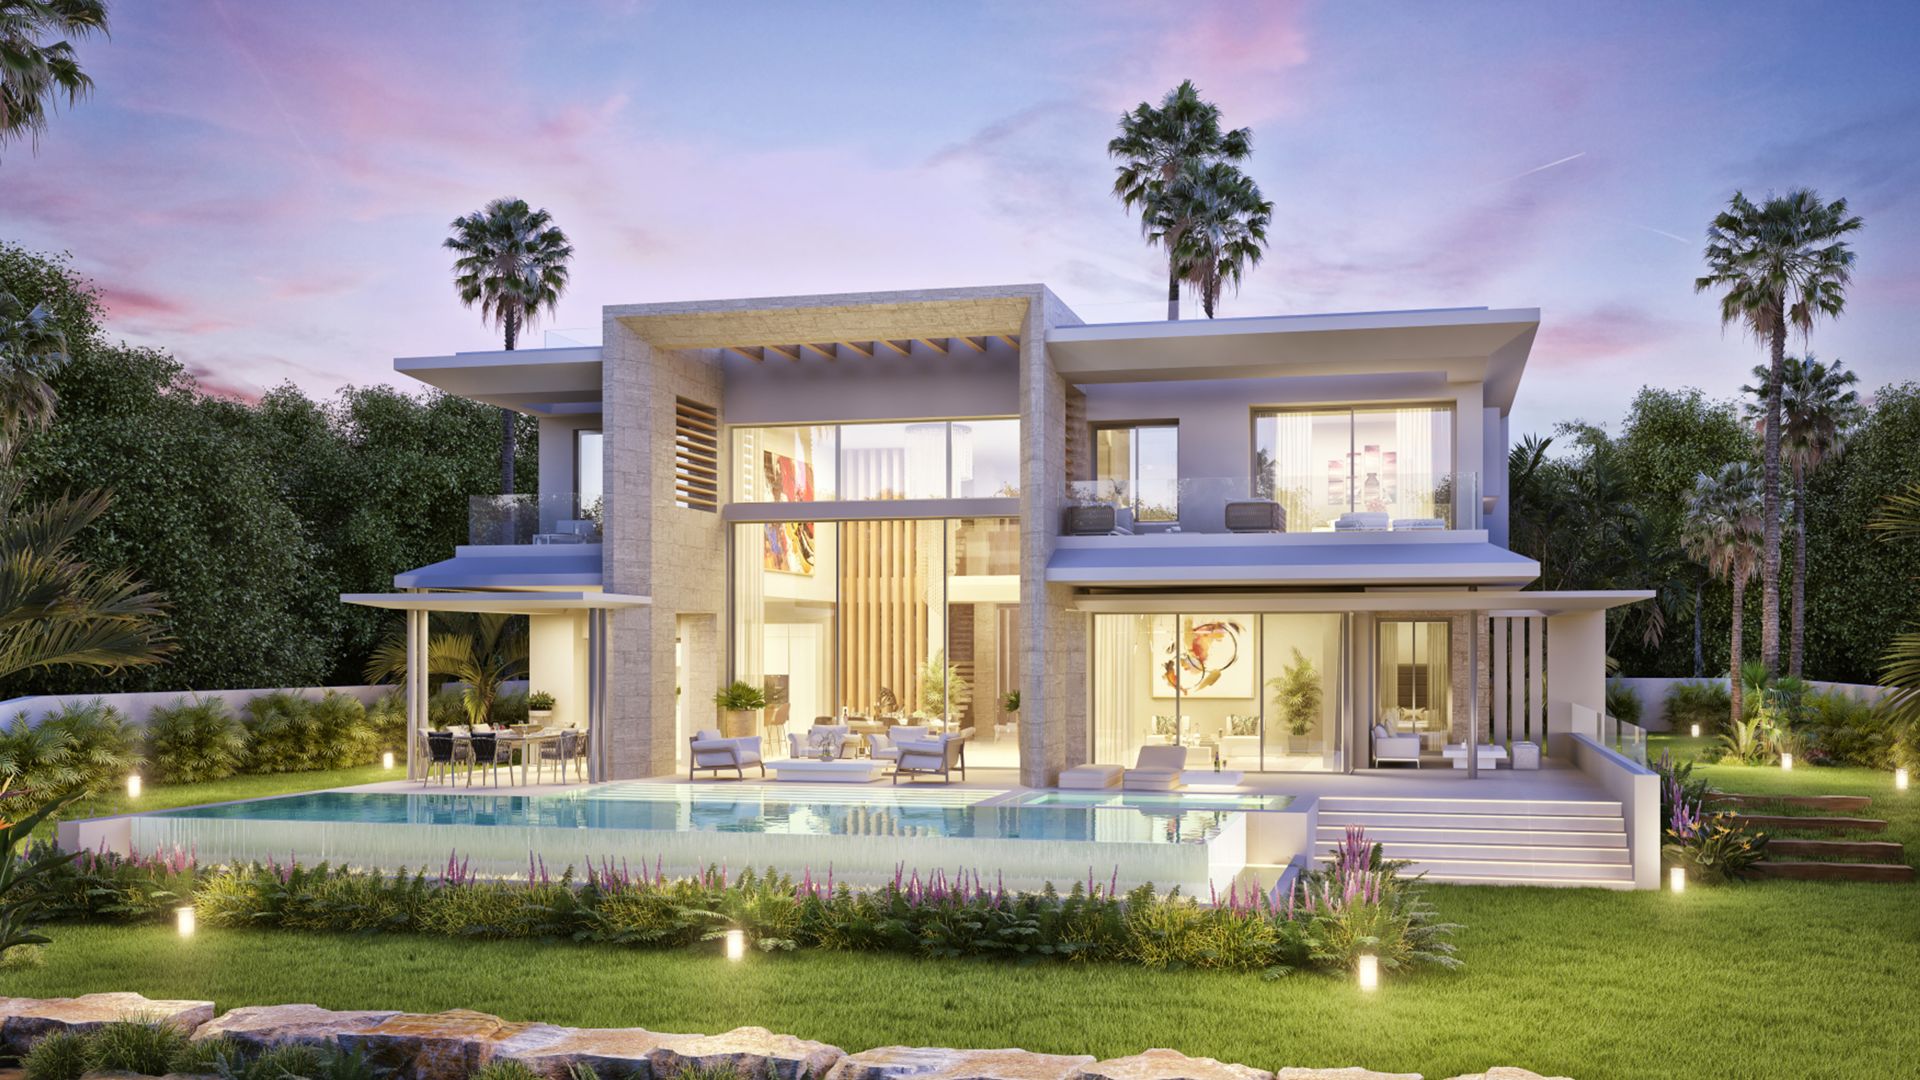 The Gallery by Minotti Marbella – An exceptional gated community of luxury villas with 5* star resort amenities | Engel & Völkers Marbella